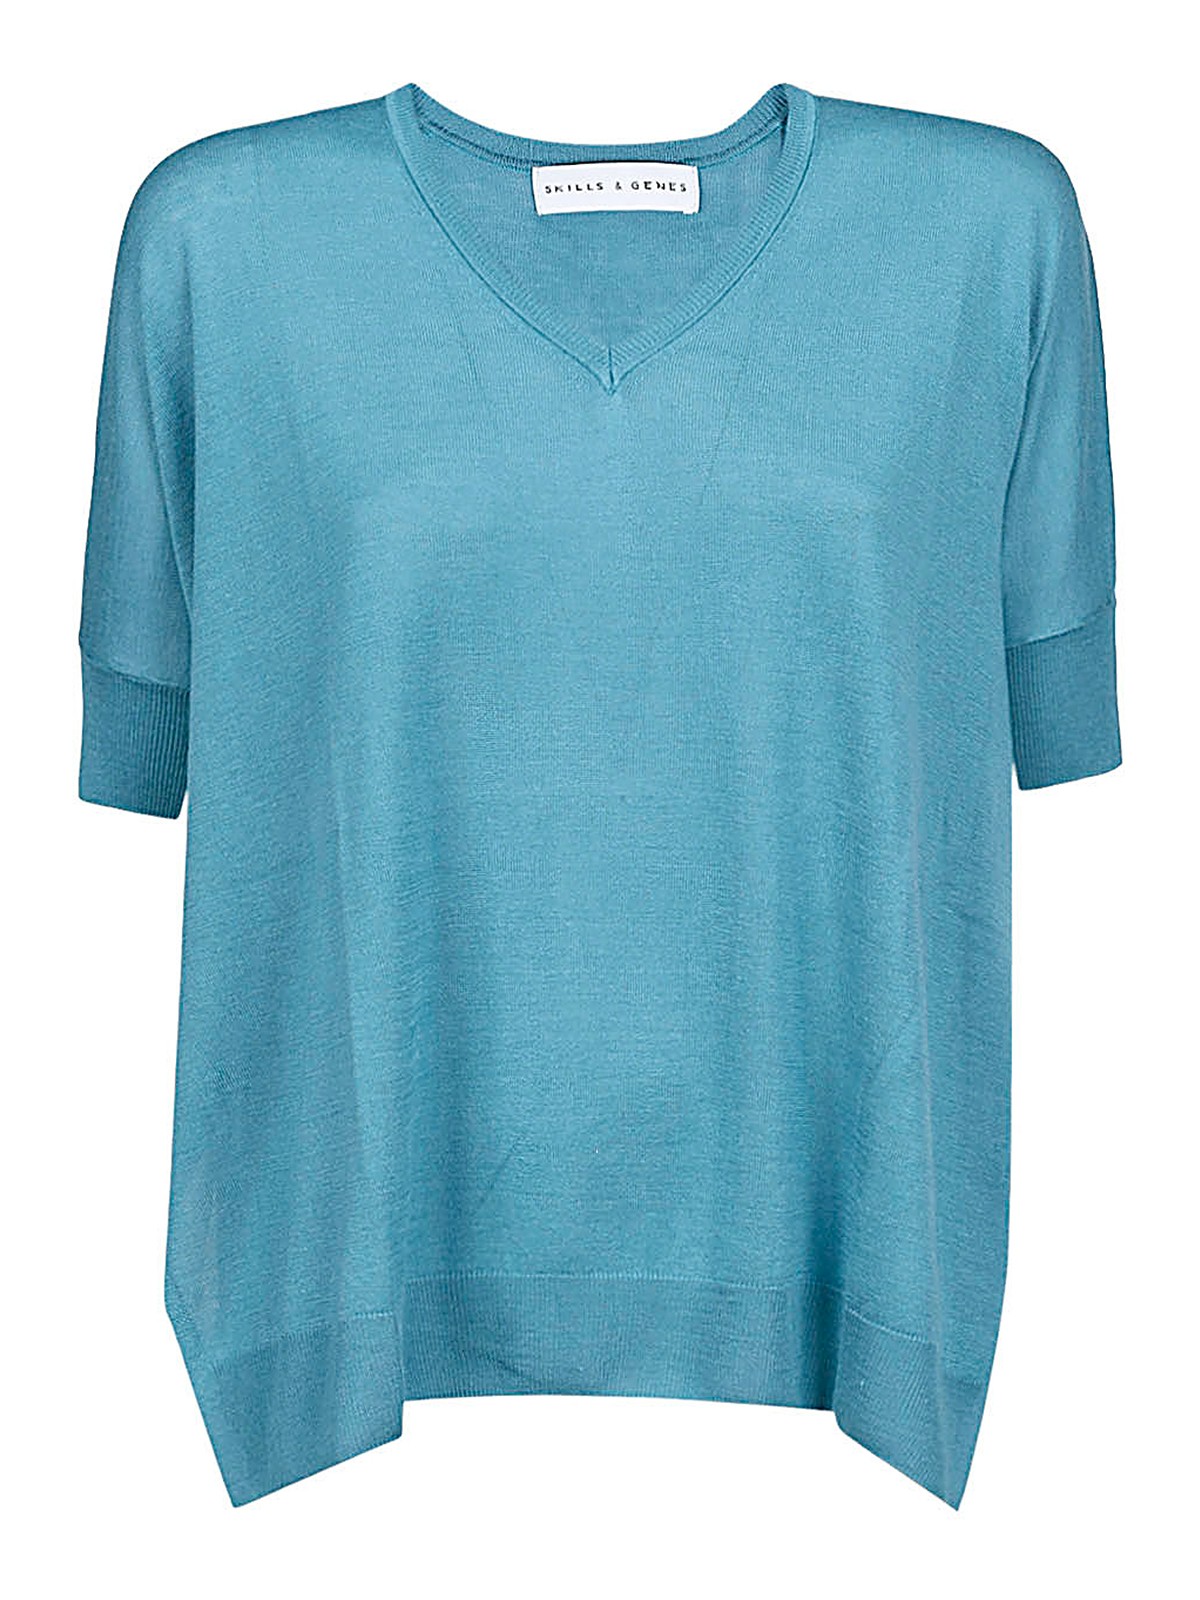 Skill&genes Oversized Cotton T-shirt In Blue